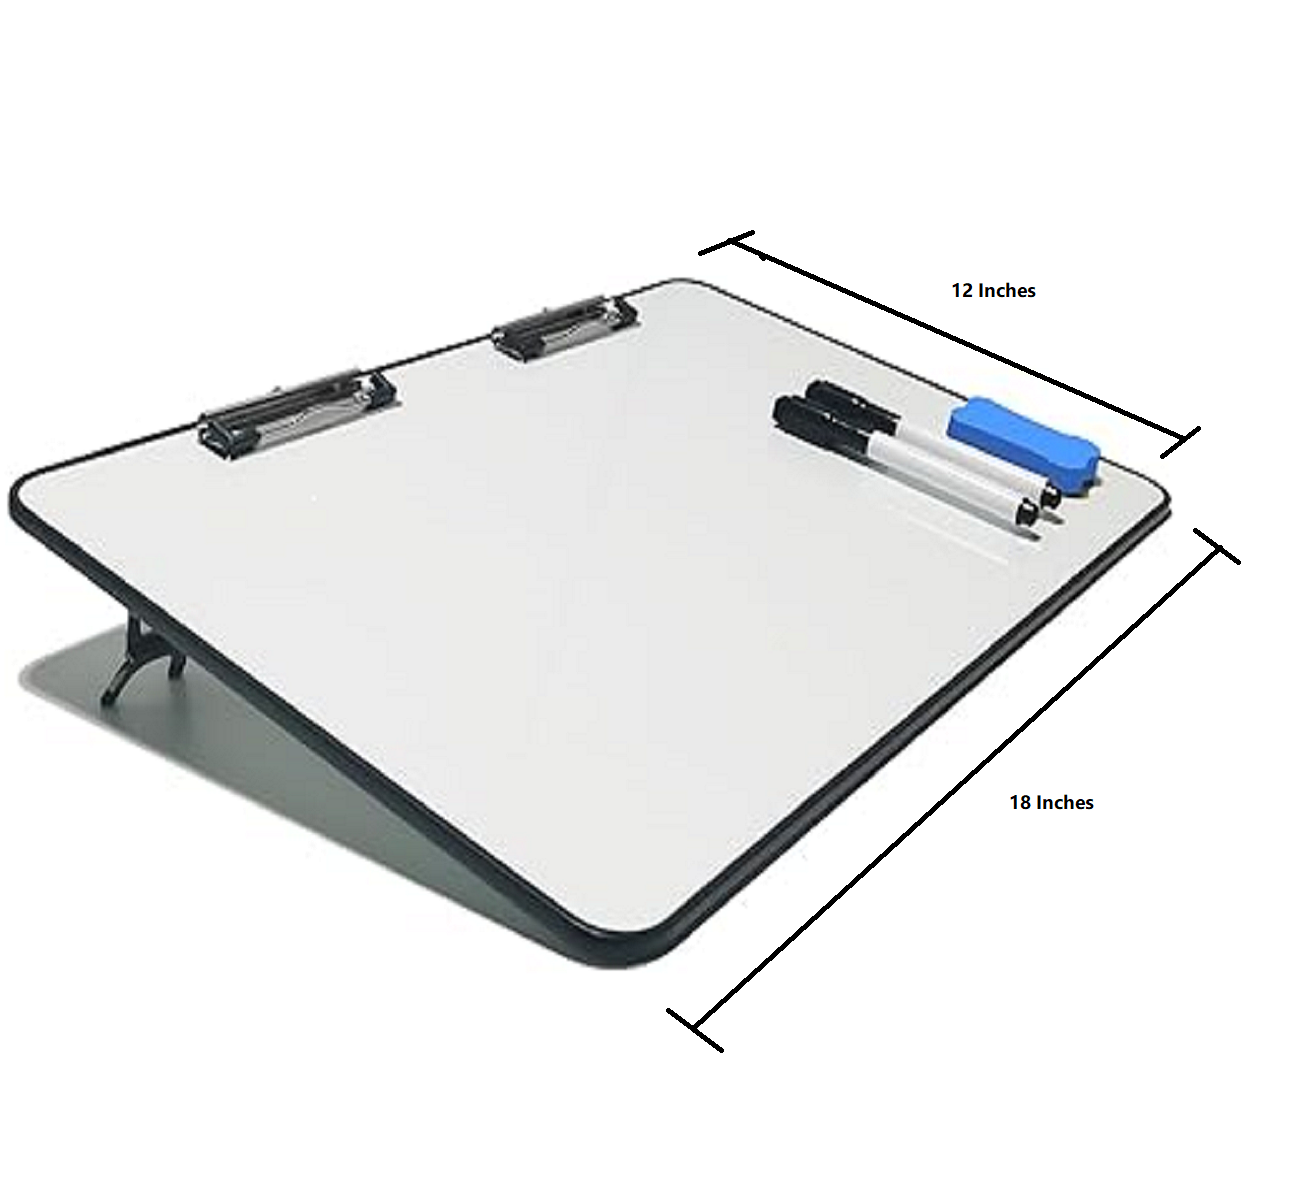 AWELUX Slant Board for Writing-Dry Erase White Board Workstation